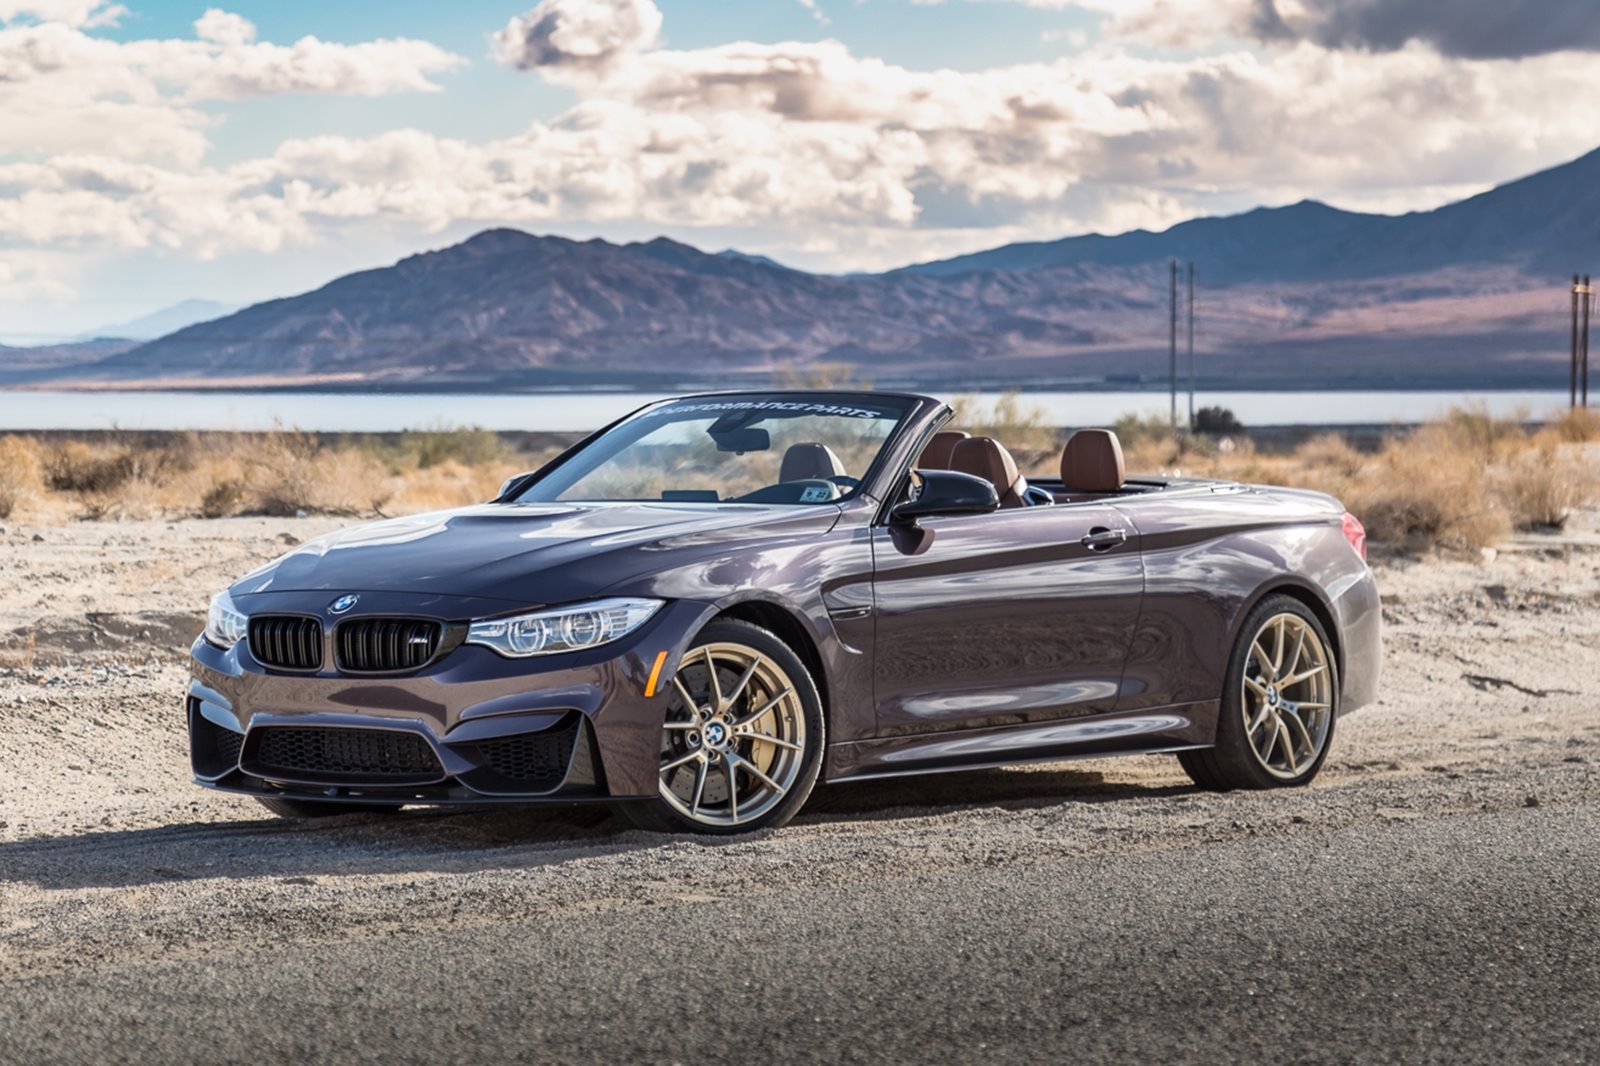 2018 Bmw M4 Convertible Test Drive Review Best Casual M Car Carbuzz